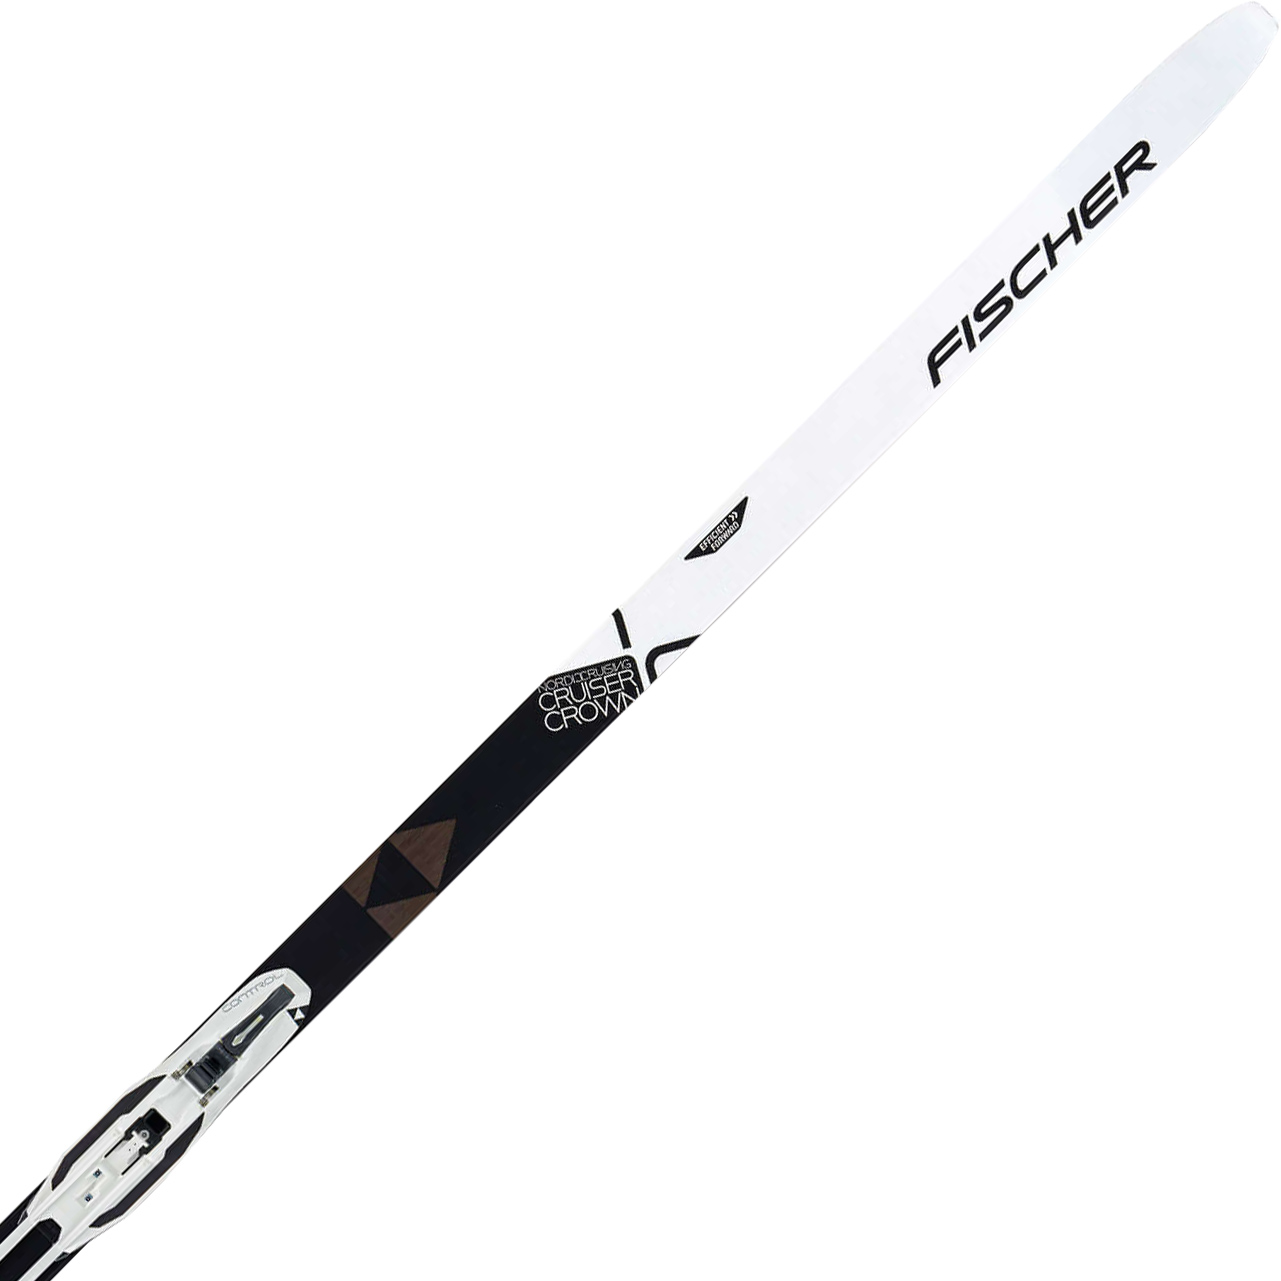 Classic style nordic skis with climbing support